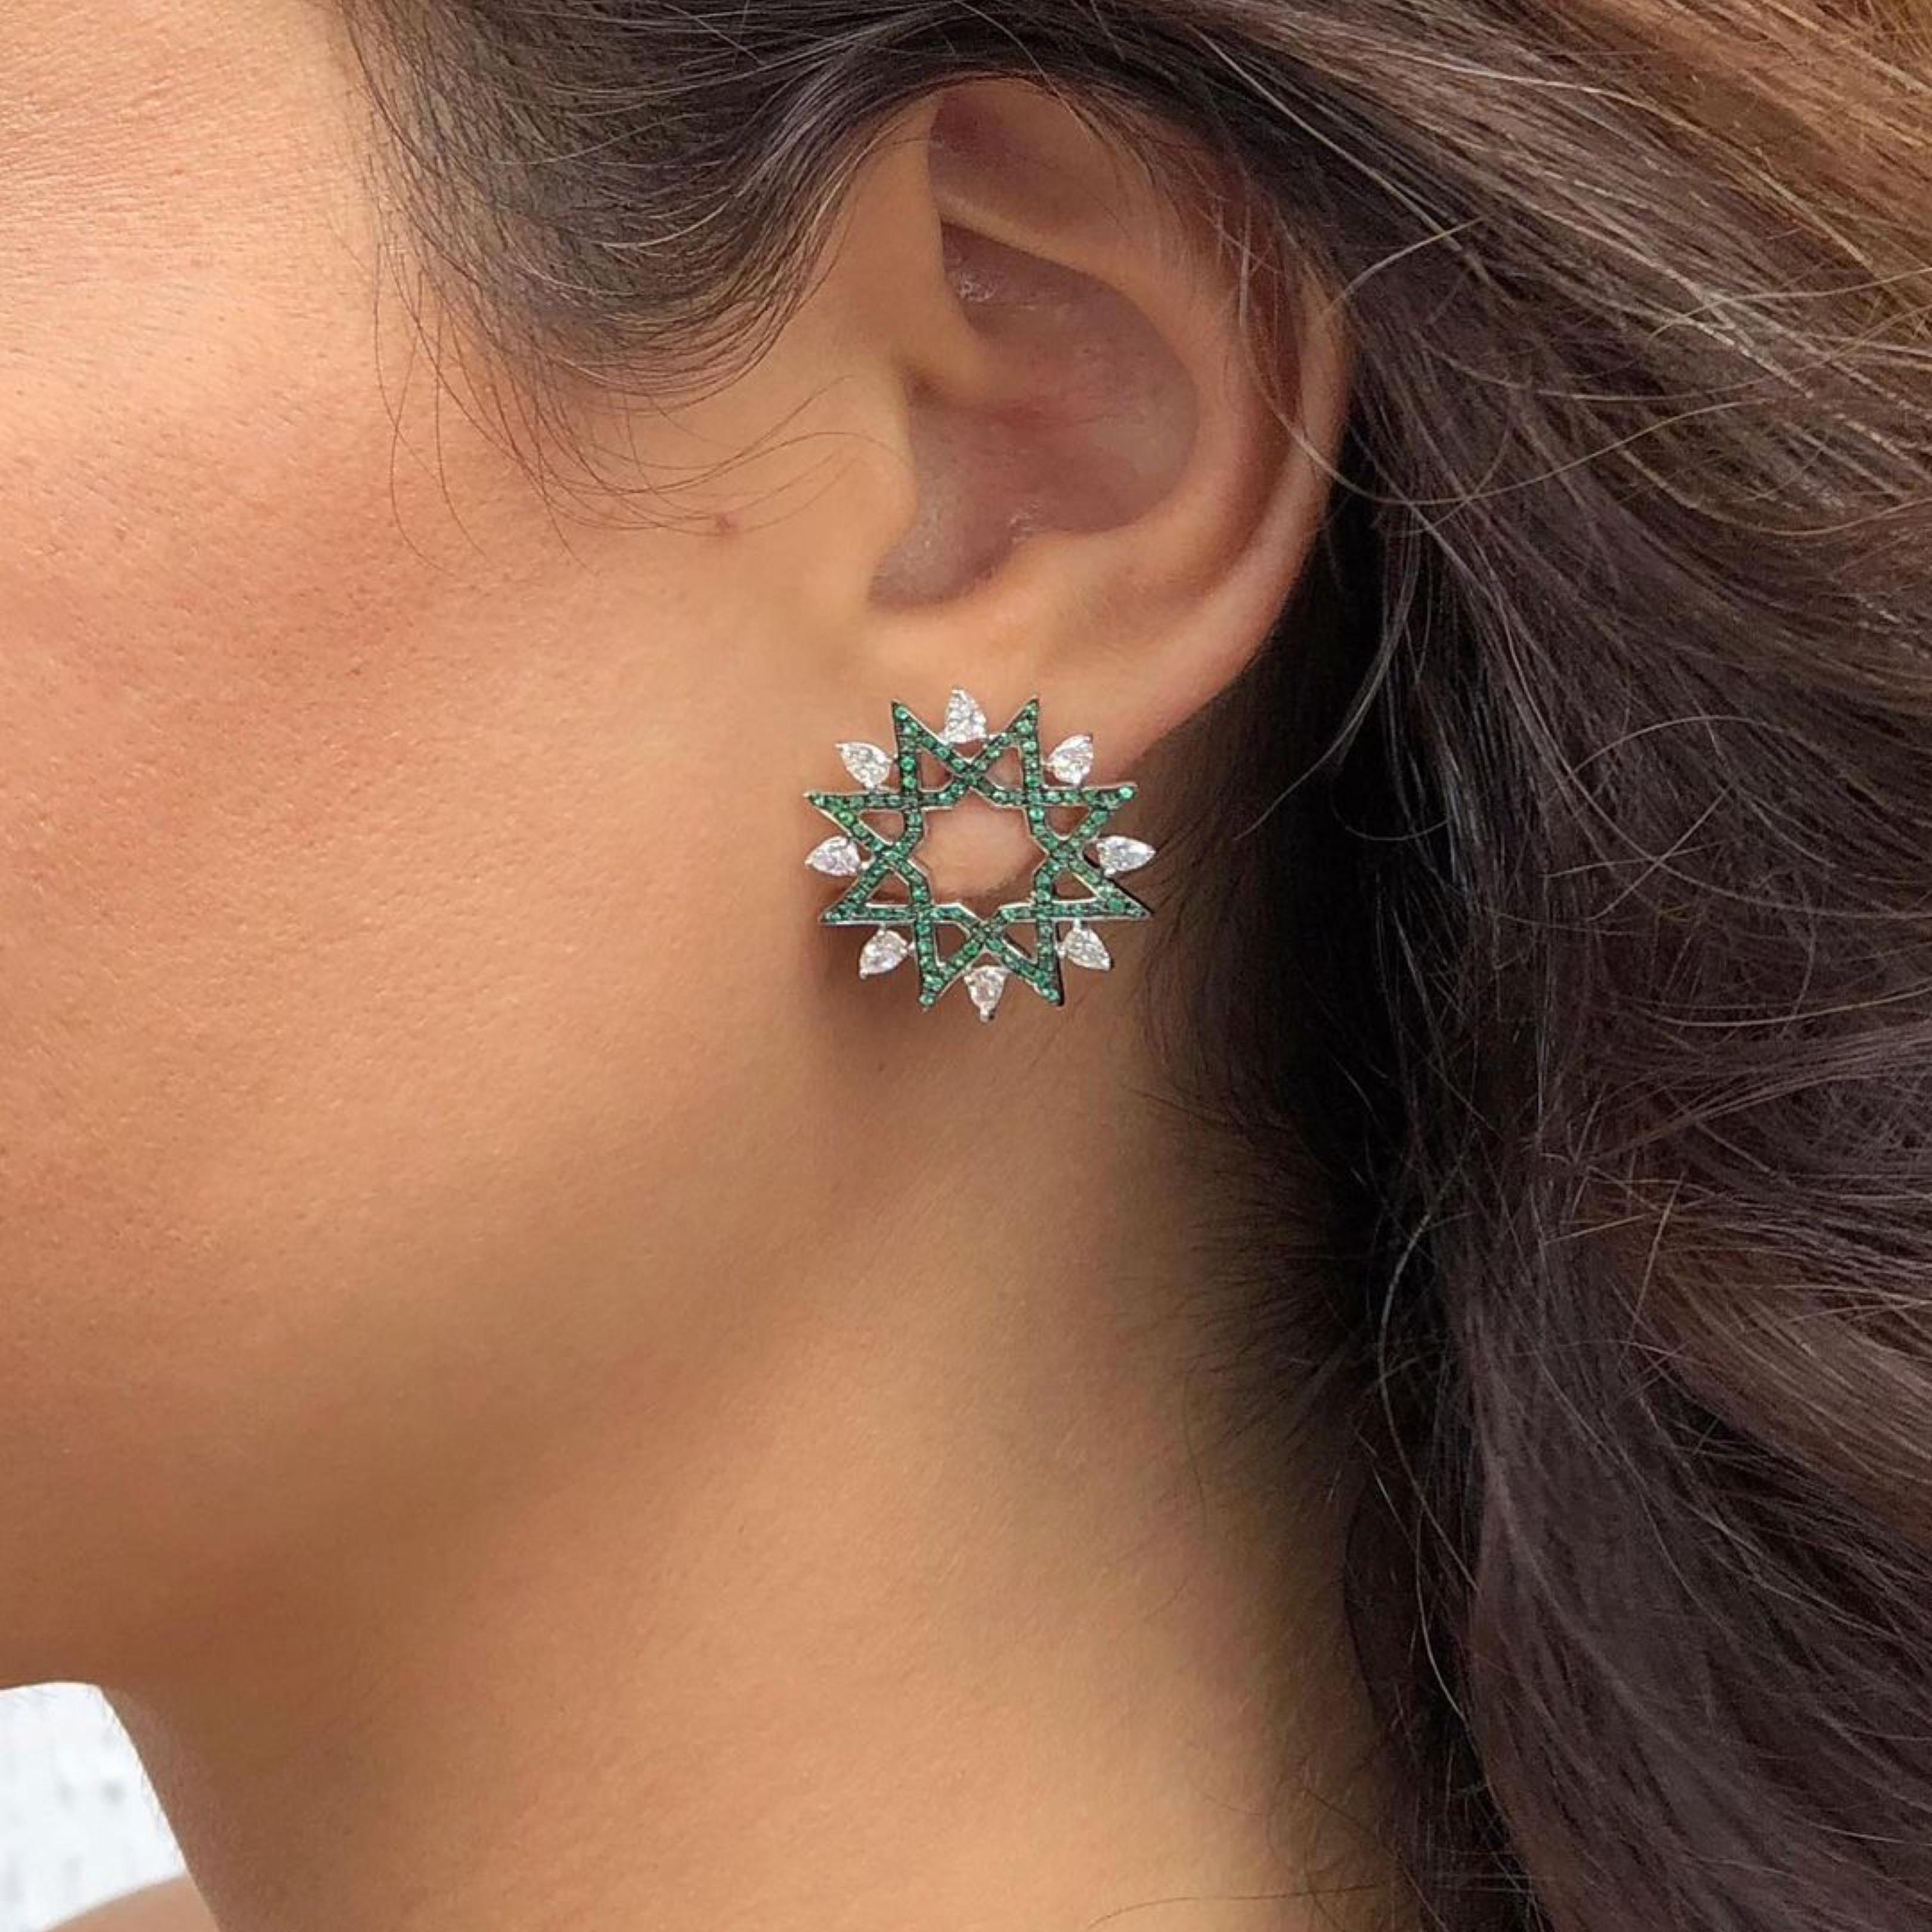 18kt white gold earrings with diamond pears and emerald pavé from Ralph Masri's Arabesque Deco collection, inspired by Middle Eastern patterns and motifs infused with an Art Deco touch.

Available in yellow, rose or white gold.

Push backs for